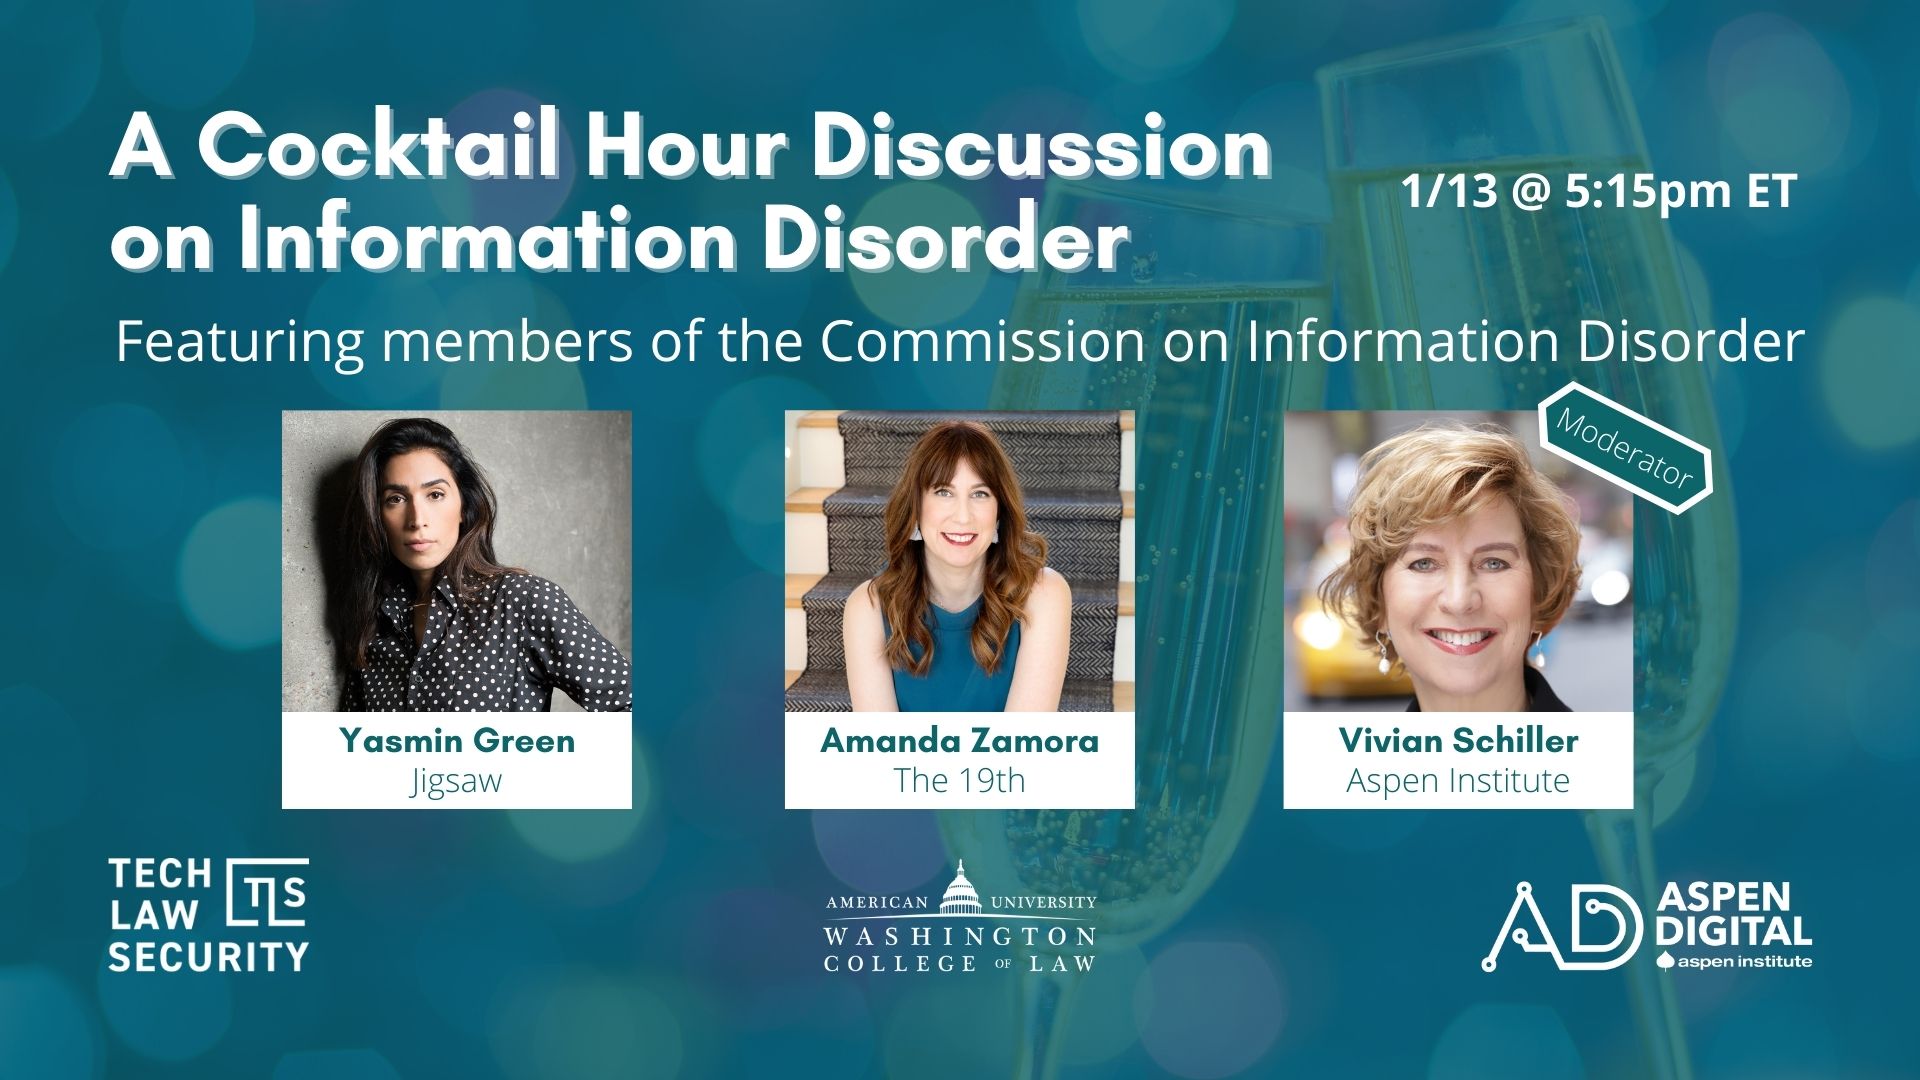 A Cocktail Hour Discussion on Information Disorder